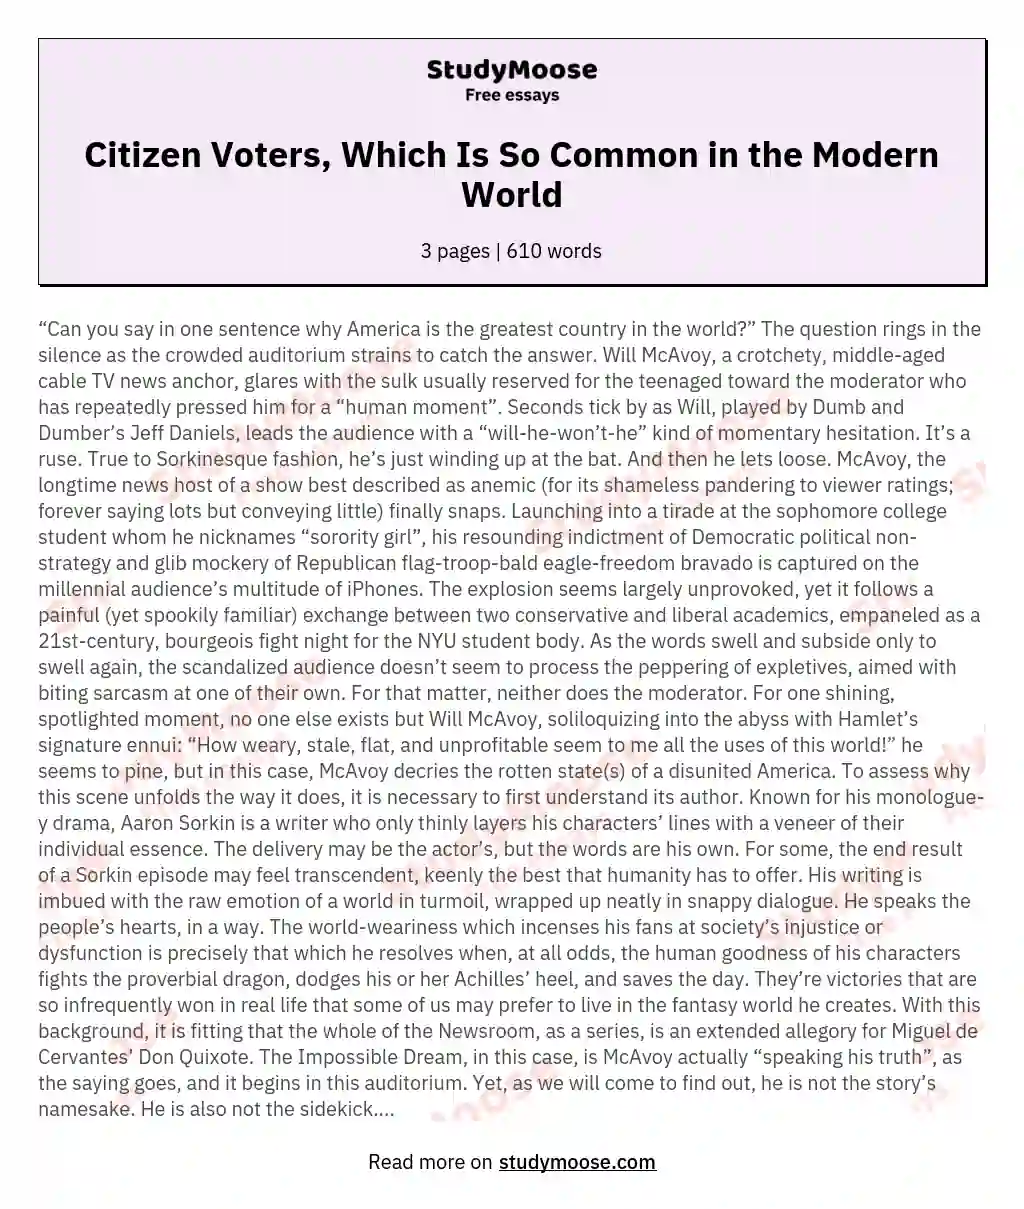 Citizen Voters, Which Is So Common in the Modern World essay